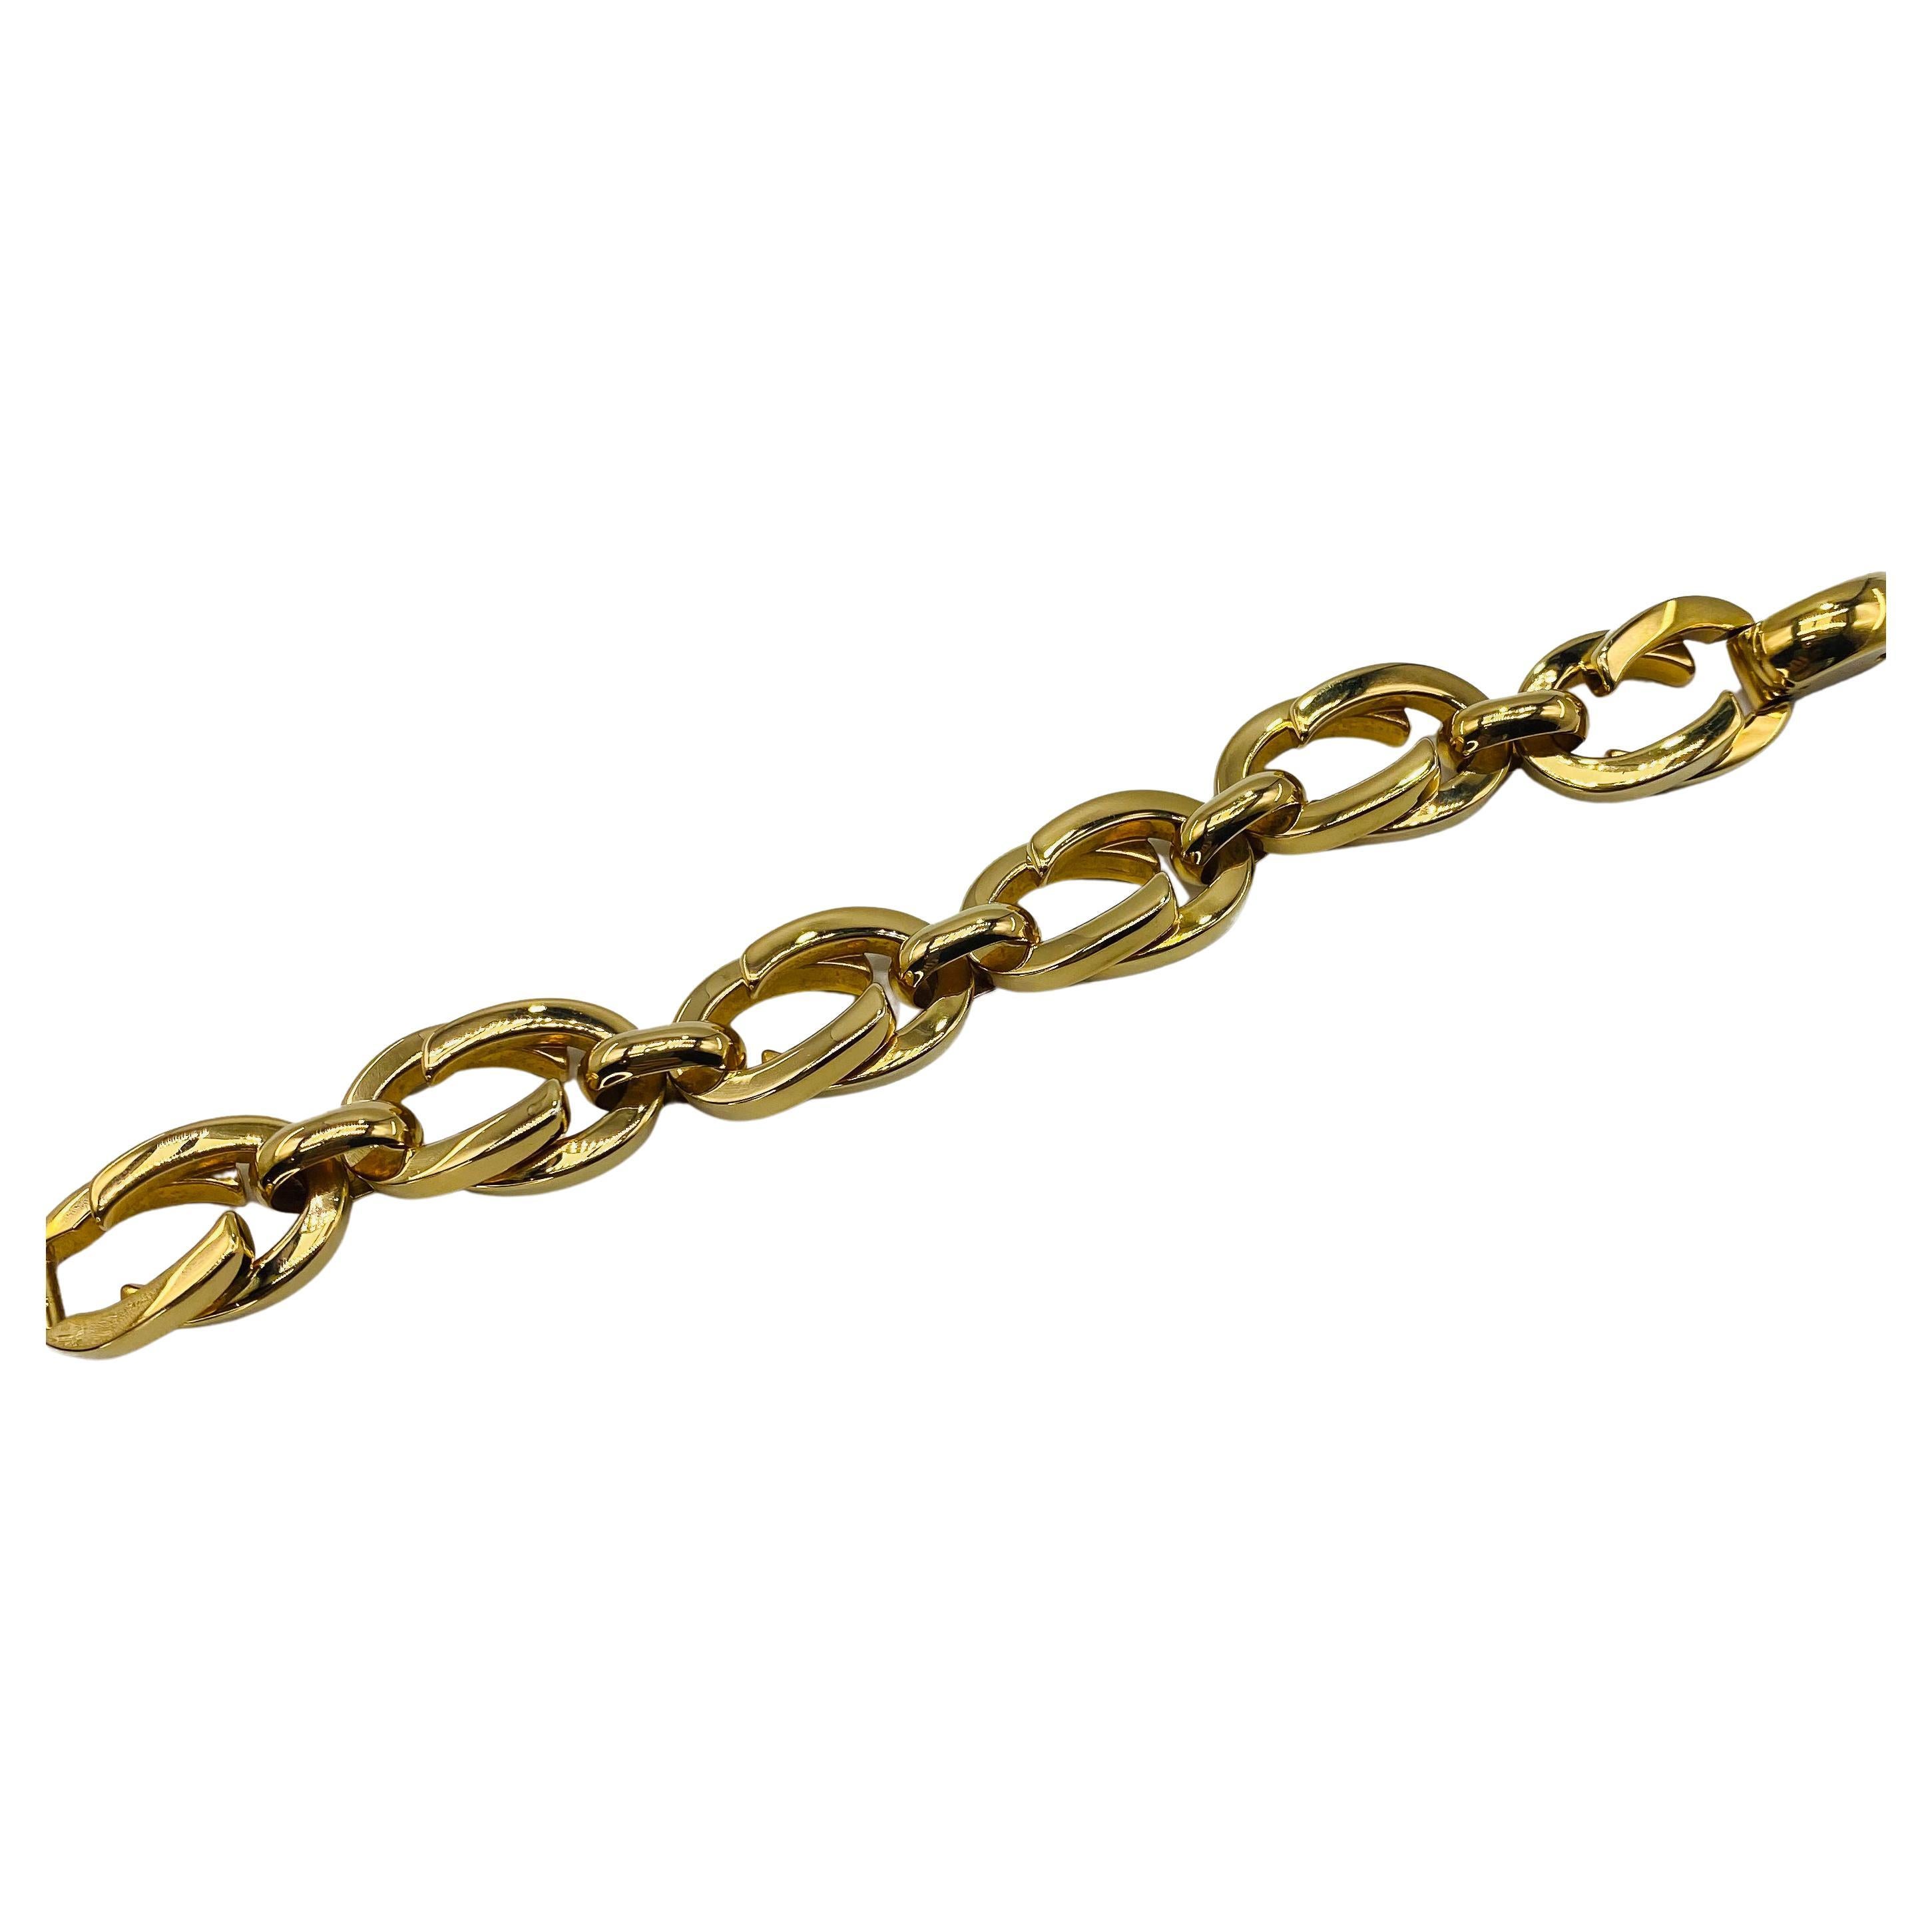 Vintage Gucci 1990s Gold Plated Bracelet - 1992 Collection